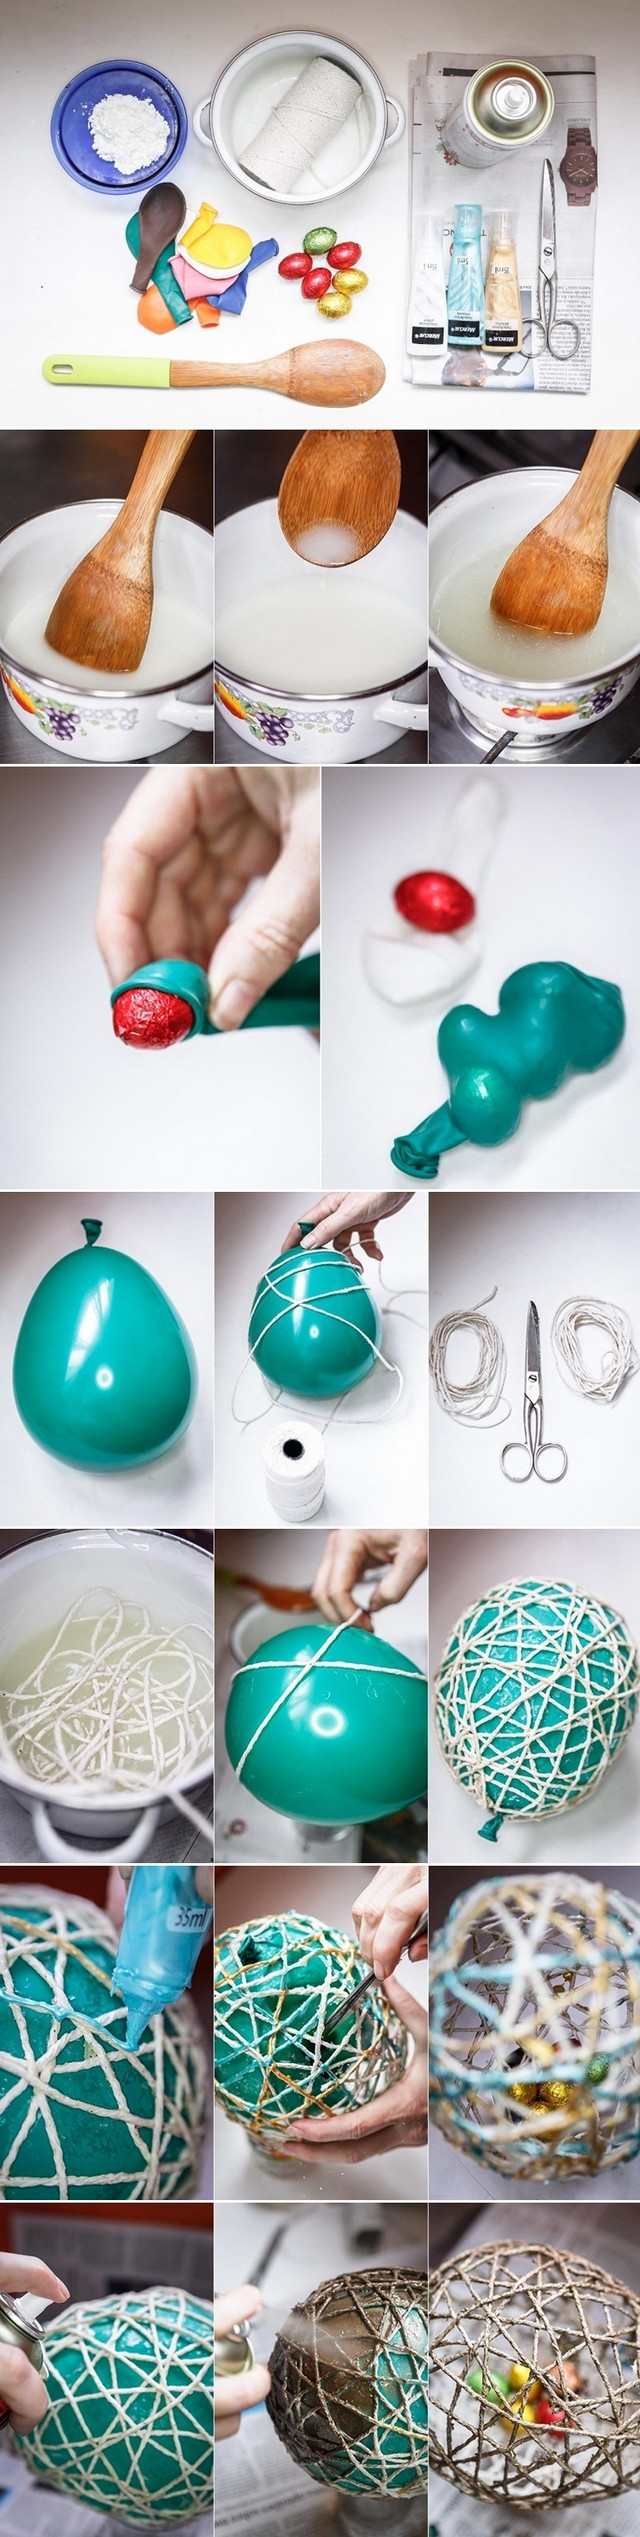 DIY Gifts For Adults
 Homemade Easter t ideas 4 Easy DIY projects for kids